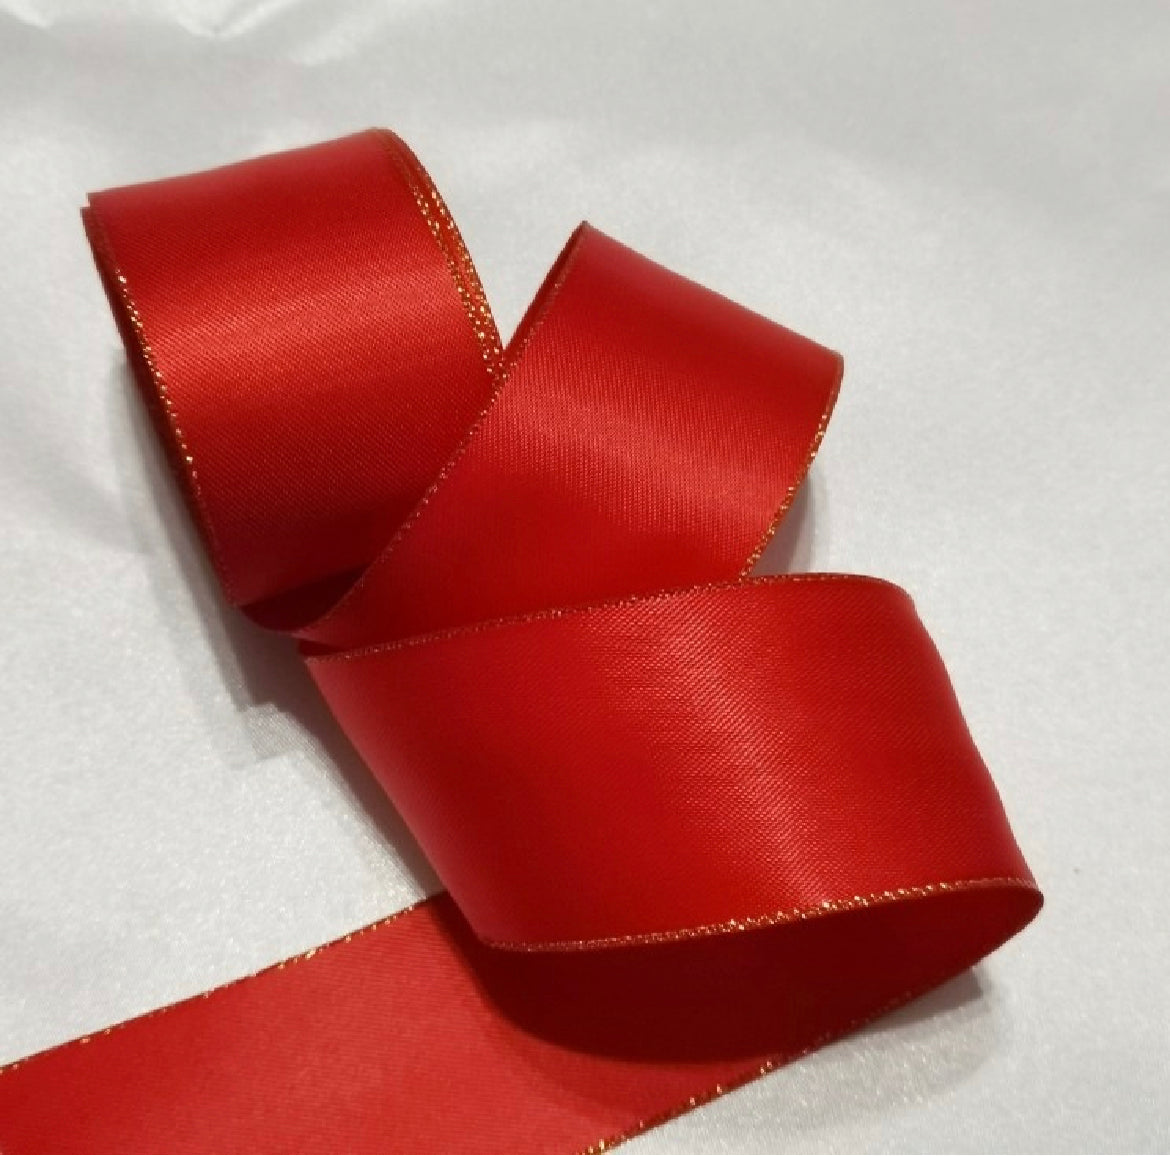  MEEDEE Gold Satin Ribbon 2 Inch Gold Ribbon Lux Satin Double  Faced Ribbon by 25 Yards Gold Silk Ribbon Satin Ribbon for Gift Wrapping,  DIY Crafts, Satin Wedding, Flower Bouquet, Holiday